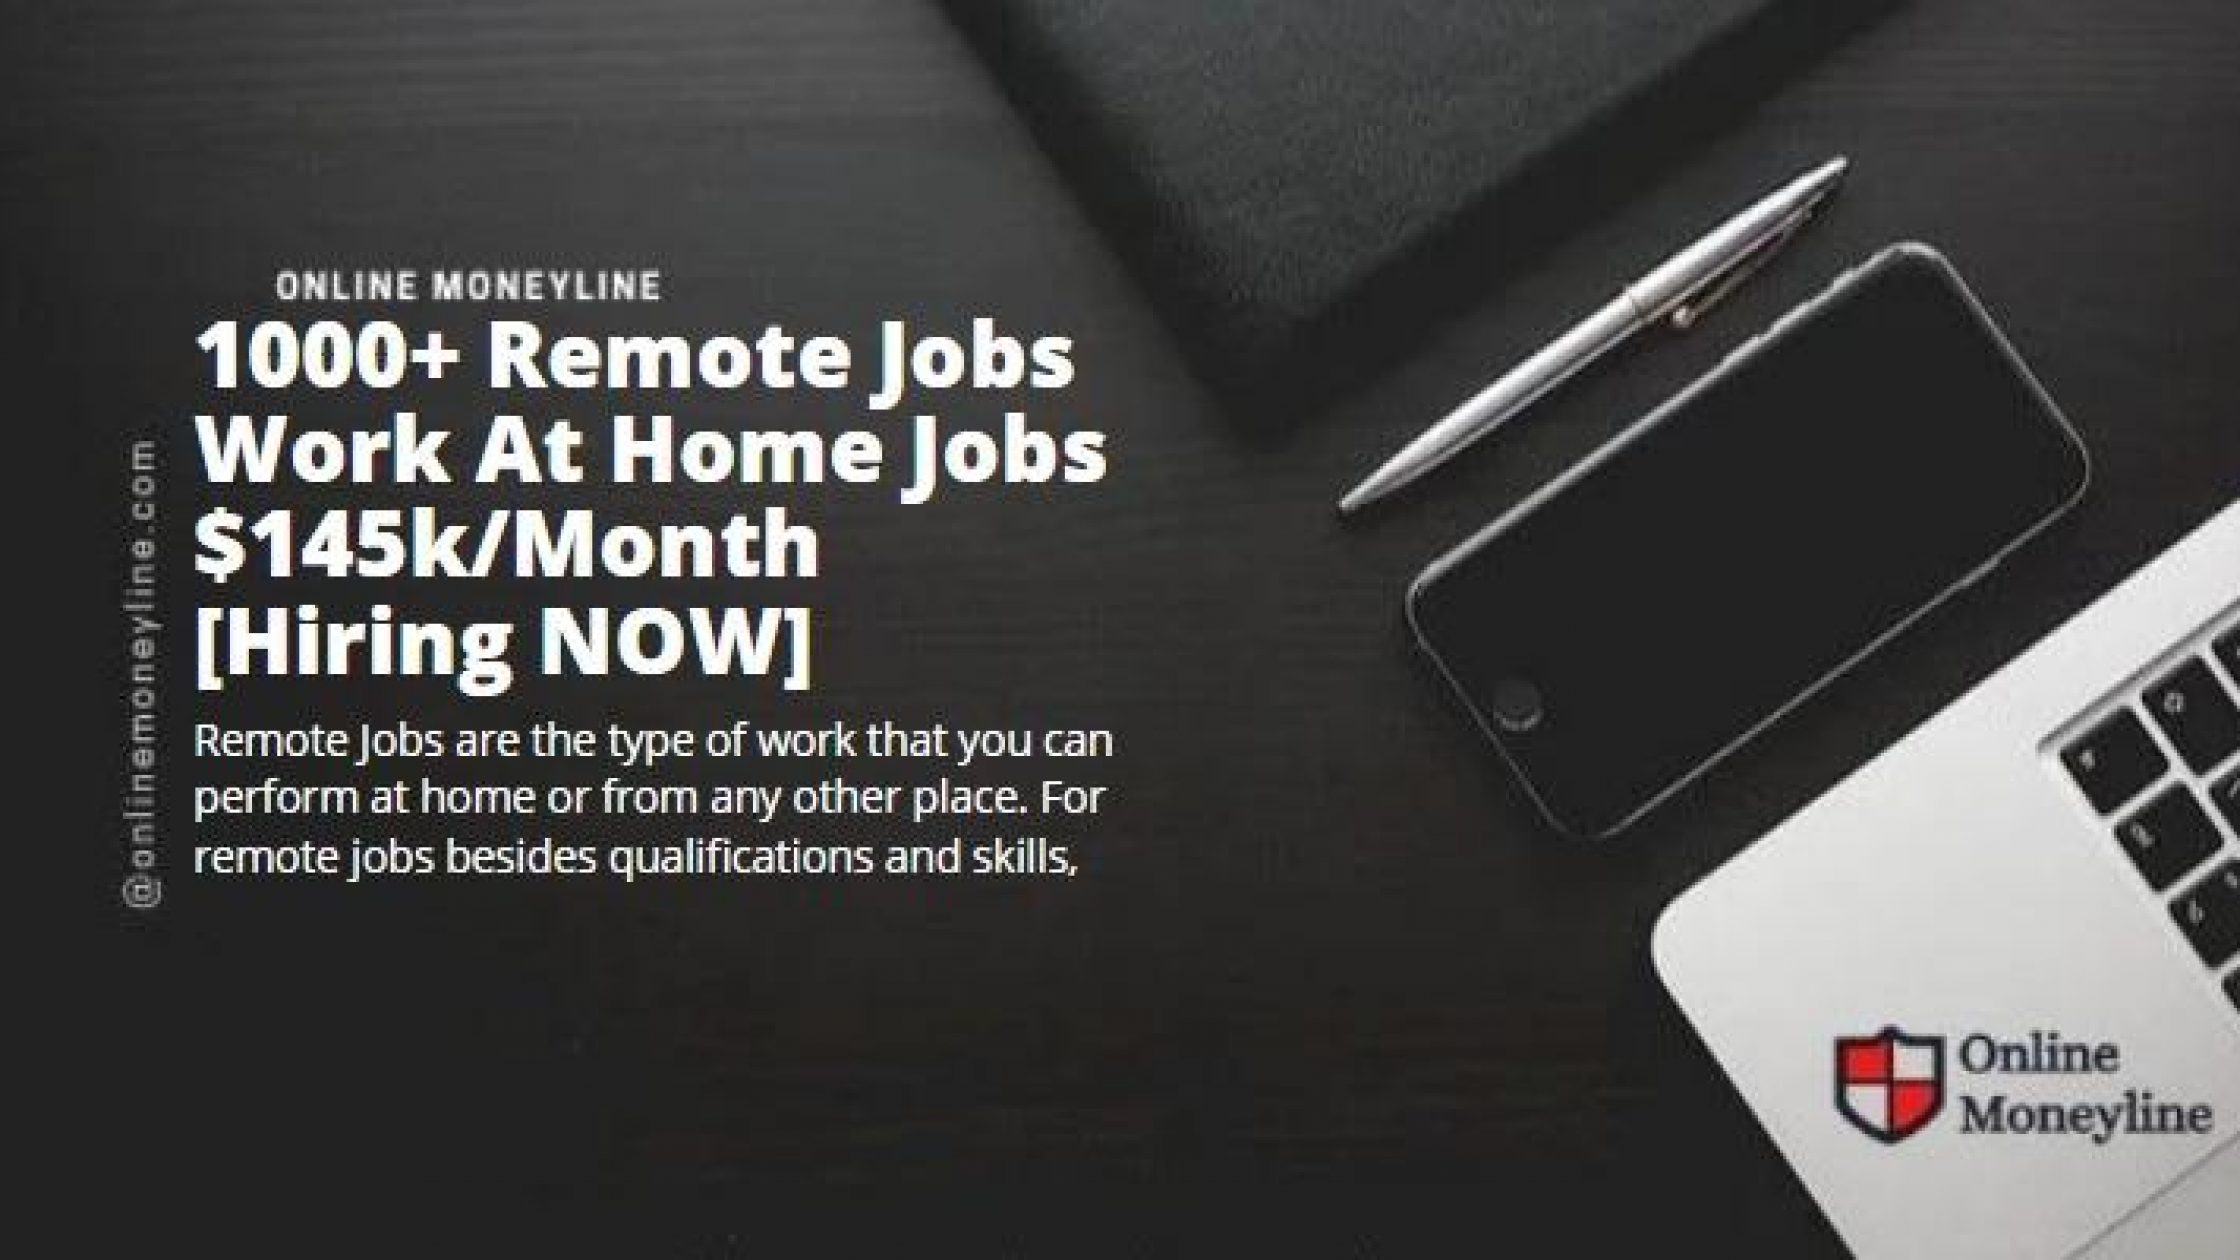 1000+ Remote Jobs Work At Home Jobs $145k/Mo [Hiring NOW]